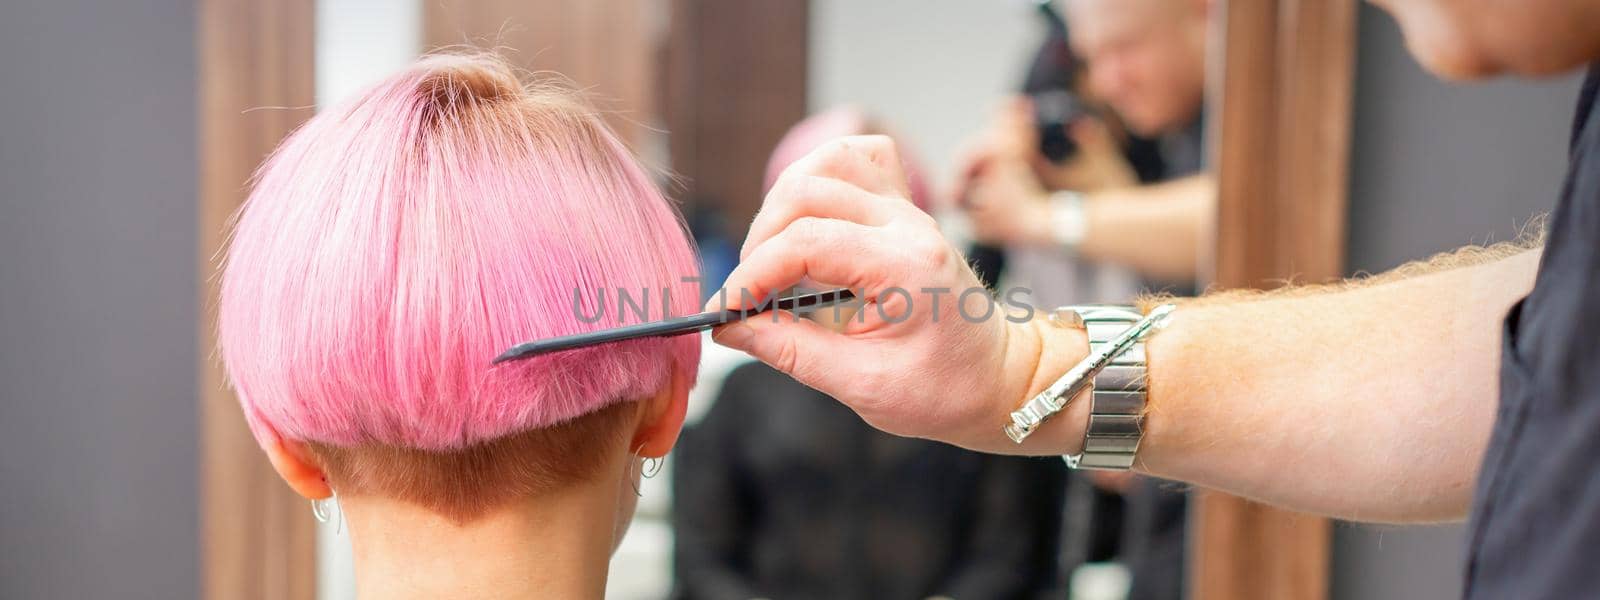 Professional hairdresser brushing short pink hair of young woman with a comb in a hairdressing salon, woman hair, rearview, copy space, back view. by okskukuruza